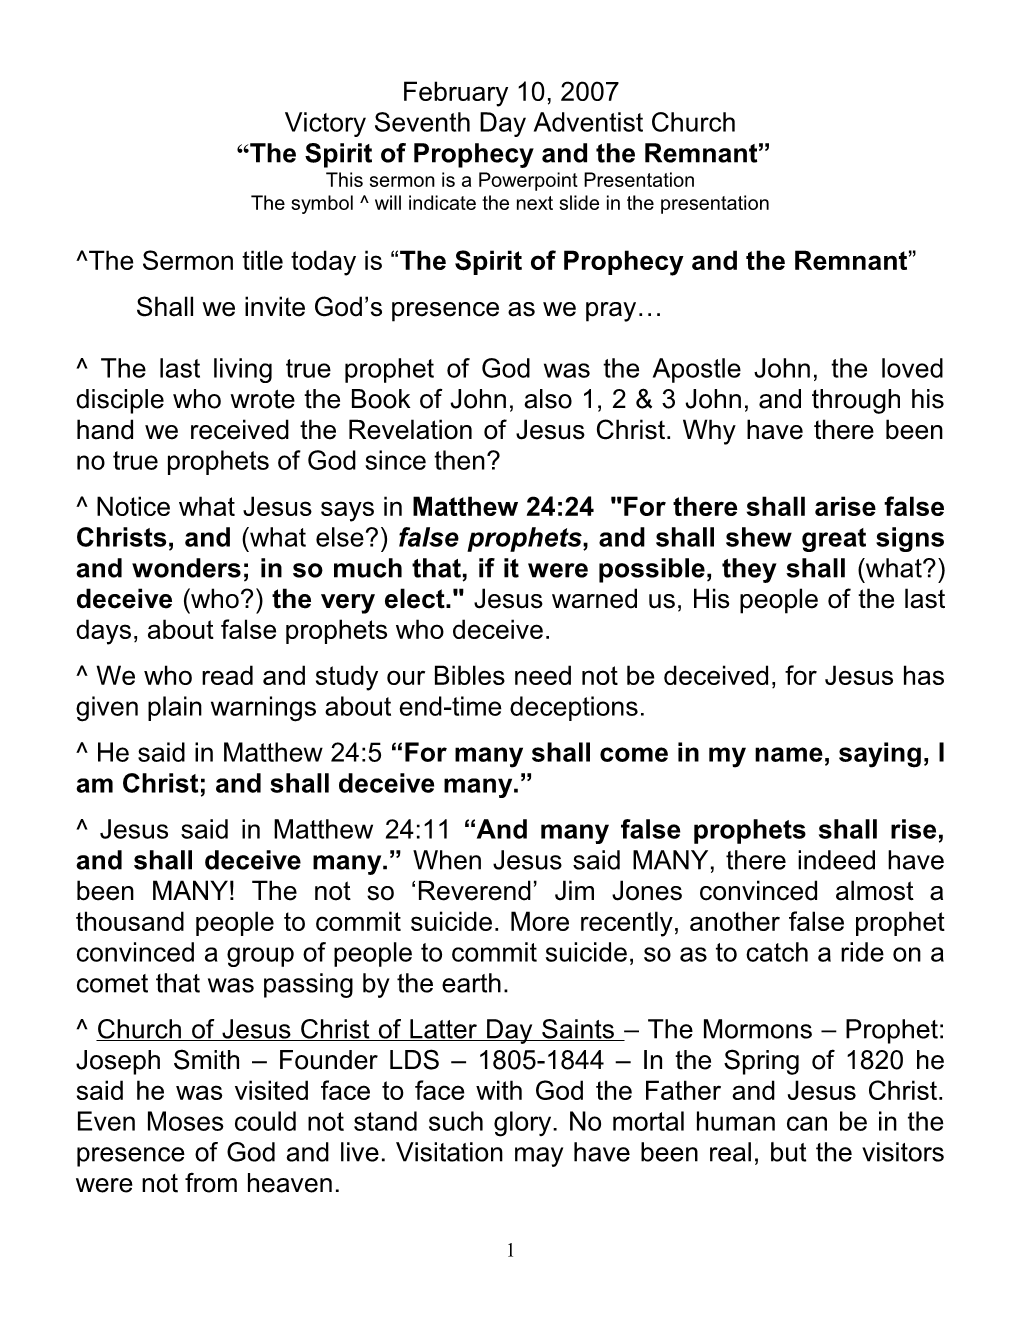 The Spirit of Prophecy and the Remnant